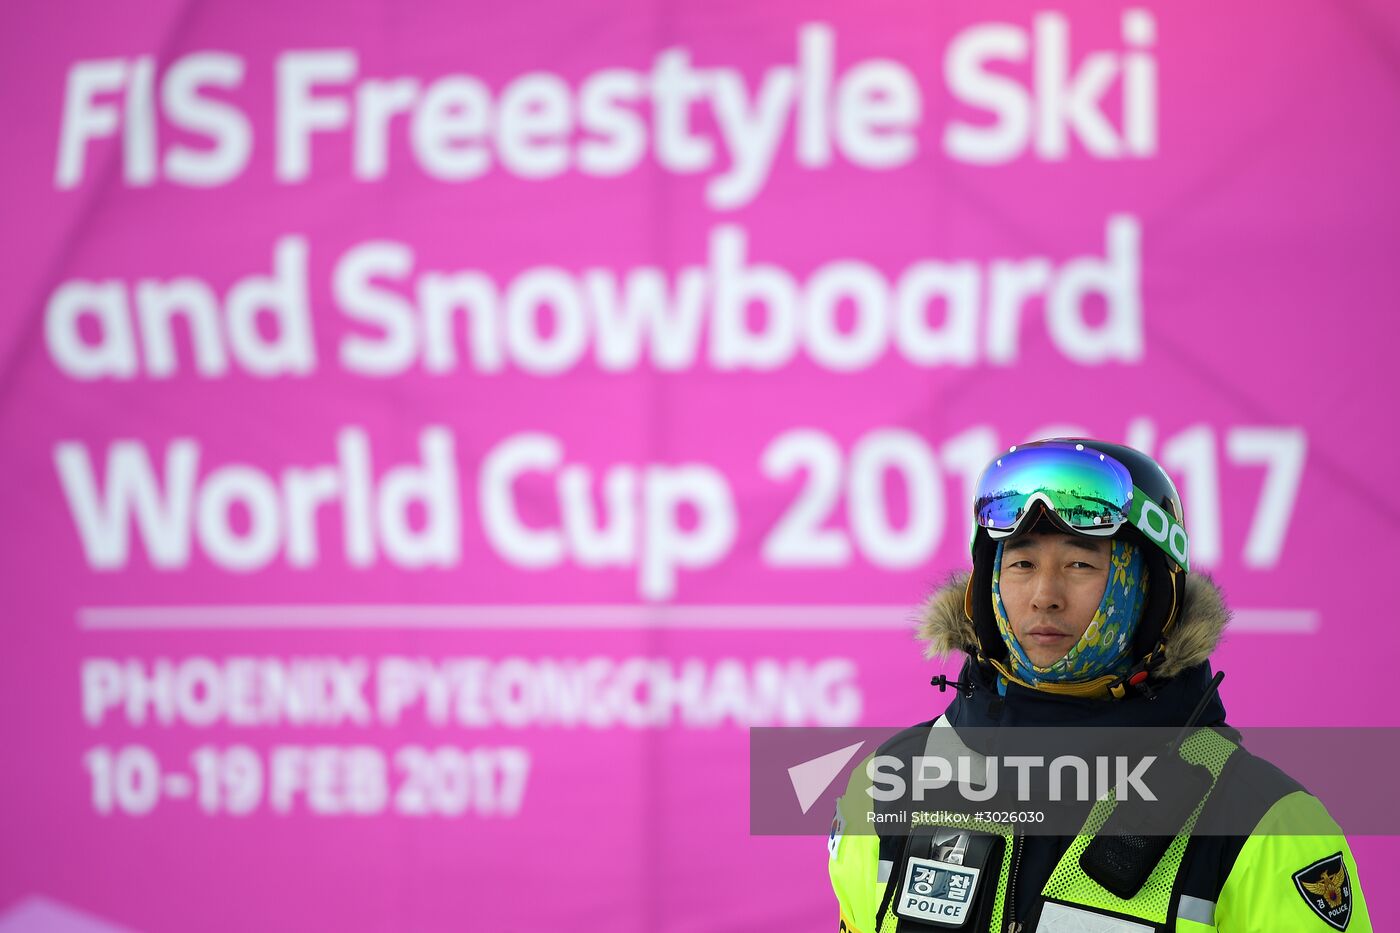 FIS Freestyle Skiing World Cup. Moguls. Training sessions